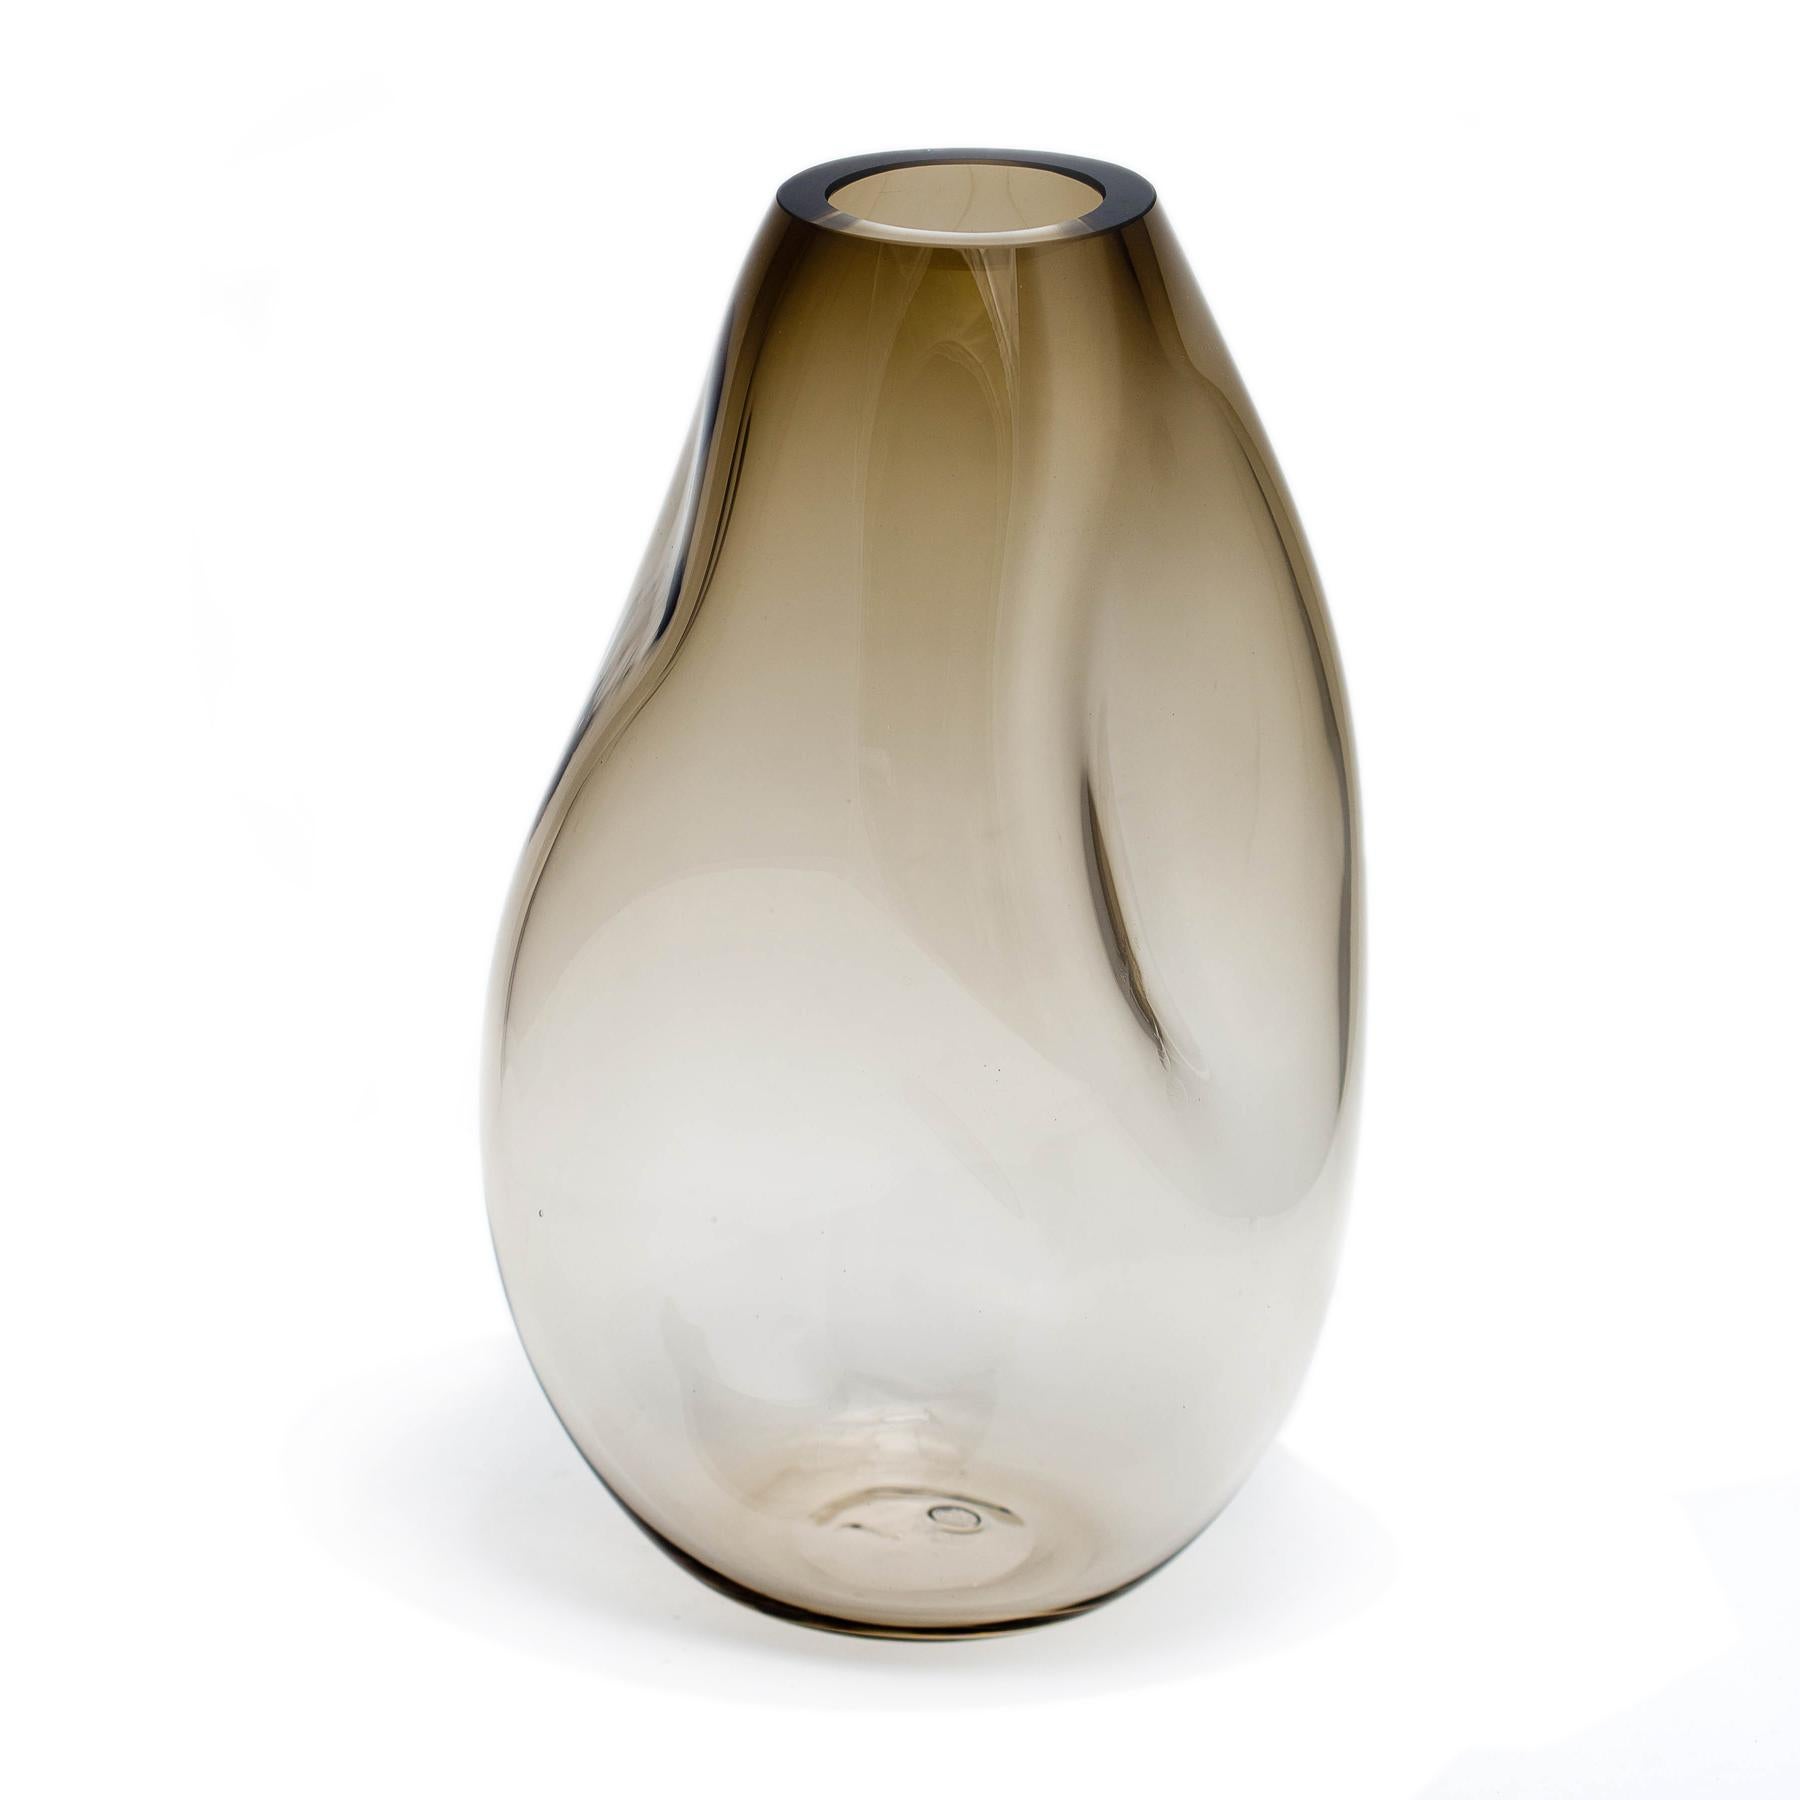 Supernova IV silver smoke L vase by Eloa.
No UL listed 
Material: glass
Dimensions: D 15 x W 17 x H 41 cm.
Also available in different colors and dimensions.

Supernova is a collection of vases and bowls that, though they don‘t shine
themselves,